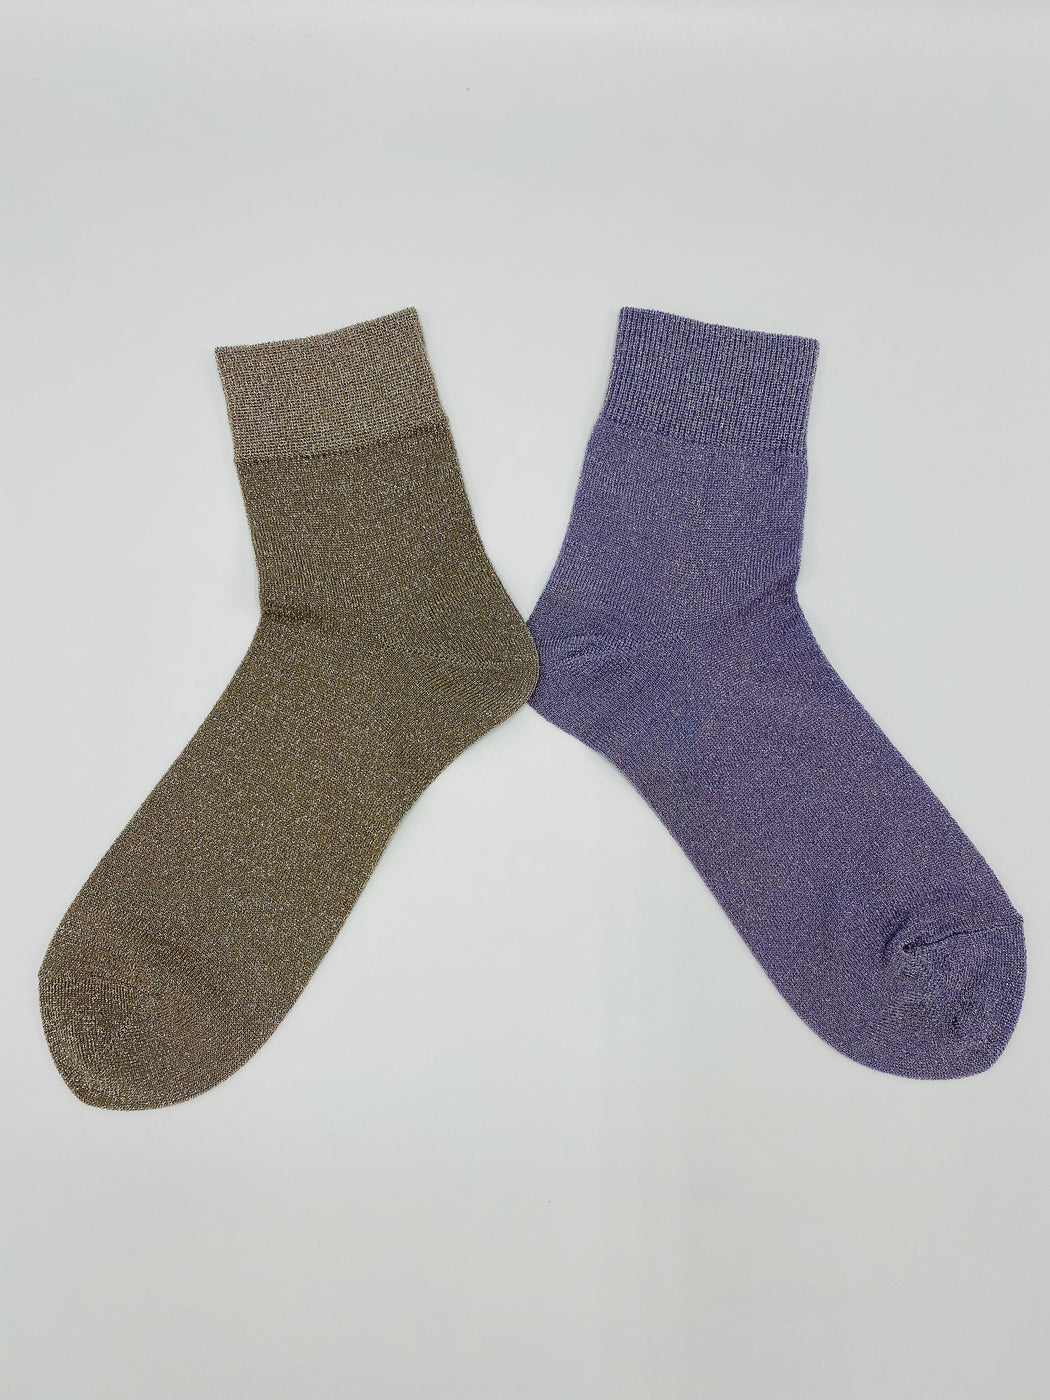 Women's sparkly socks in tan and in lilac